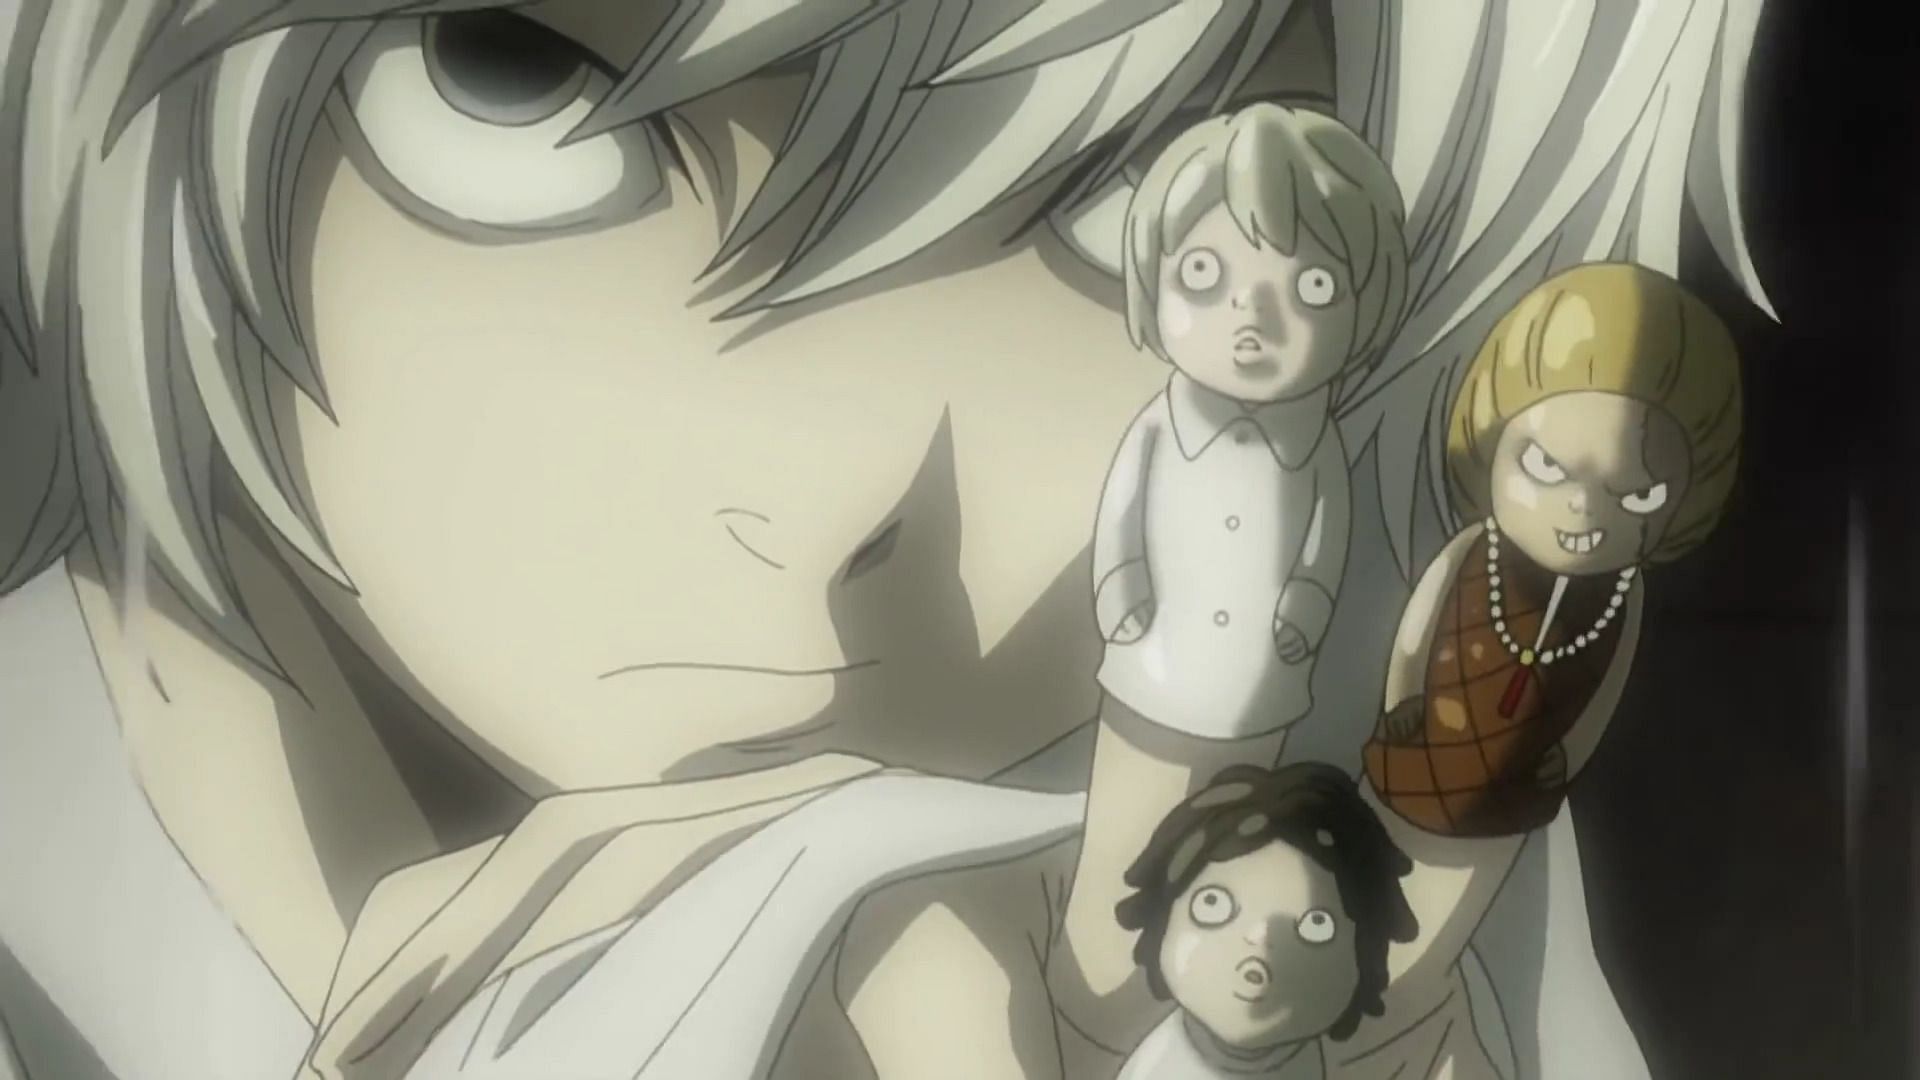 Near, from the shounen anime Death Note (Image via studio Madhouse)